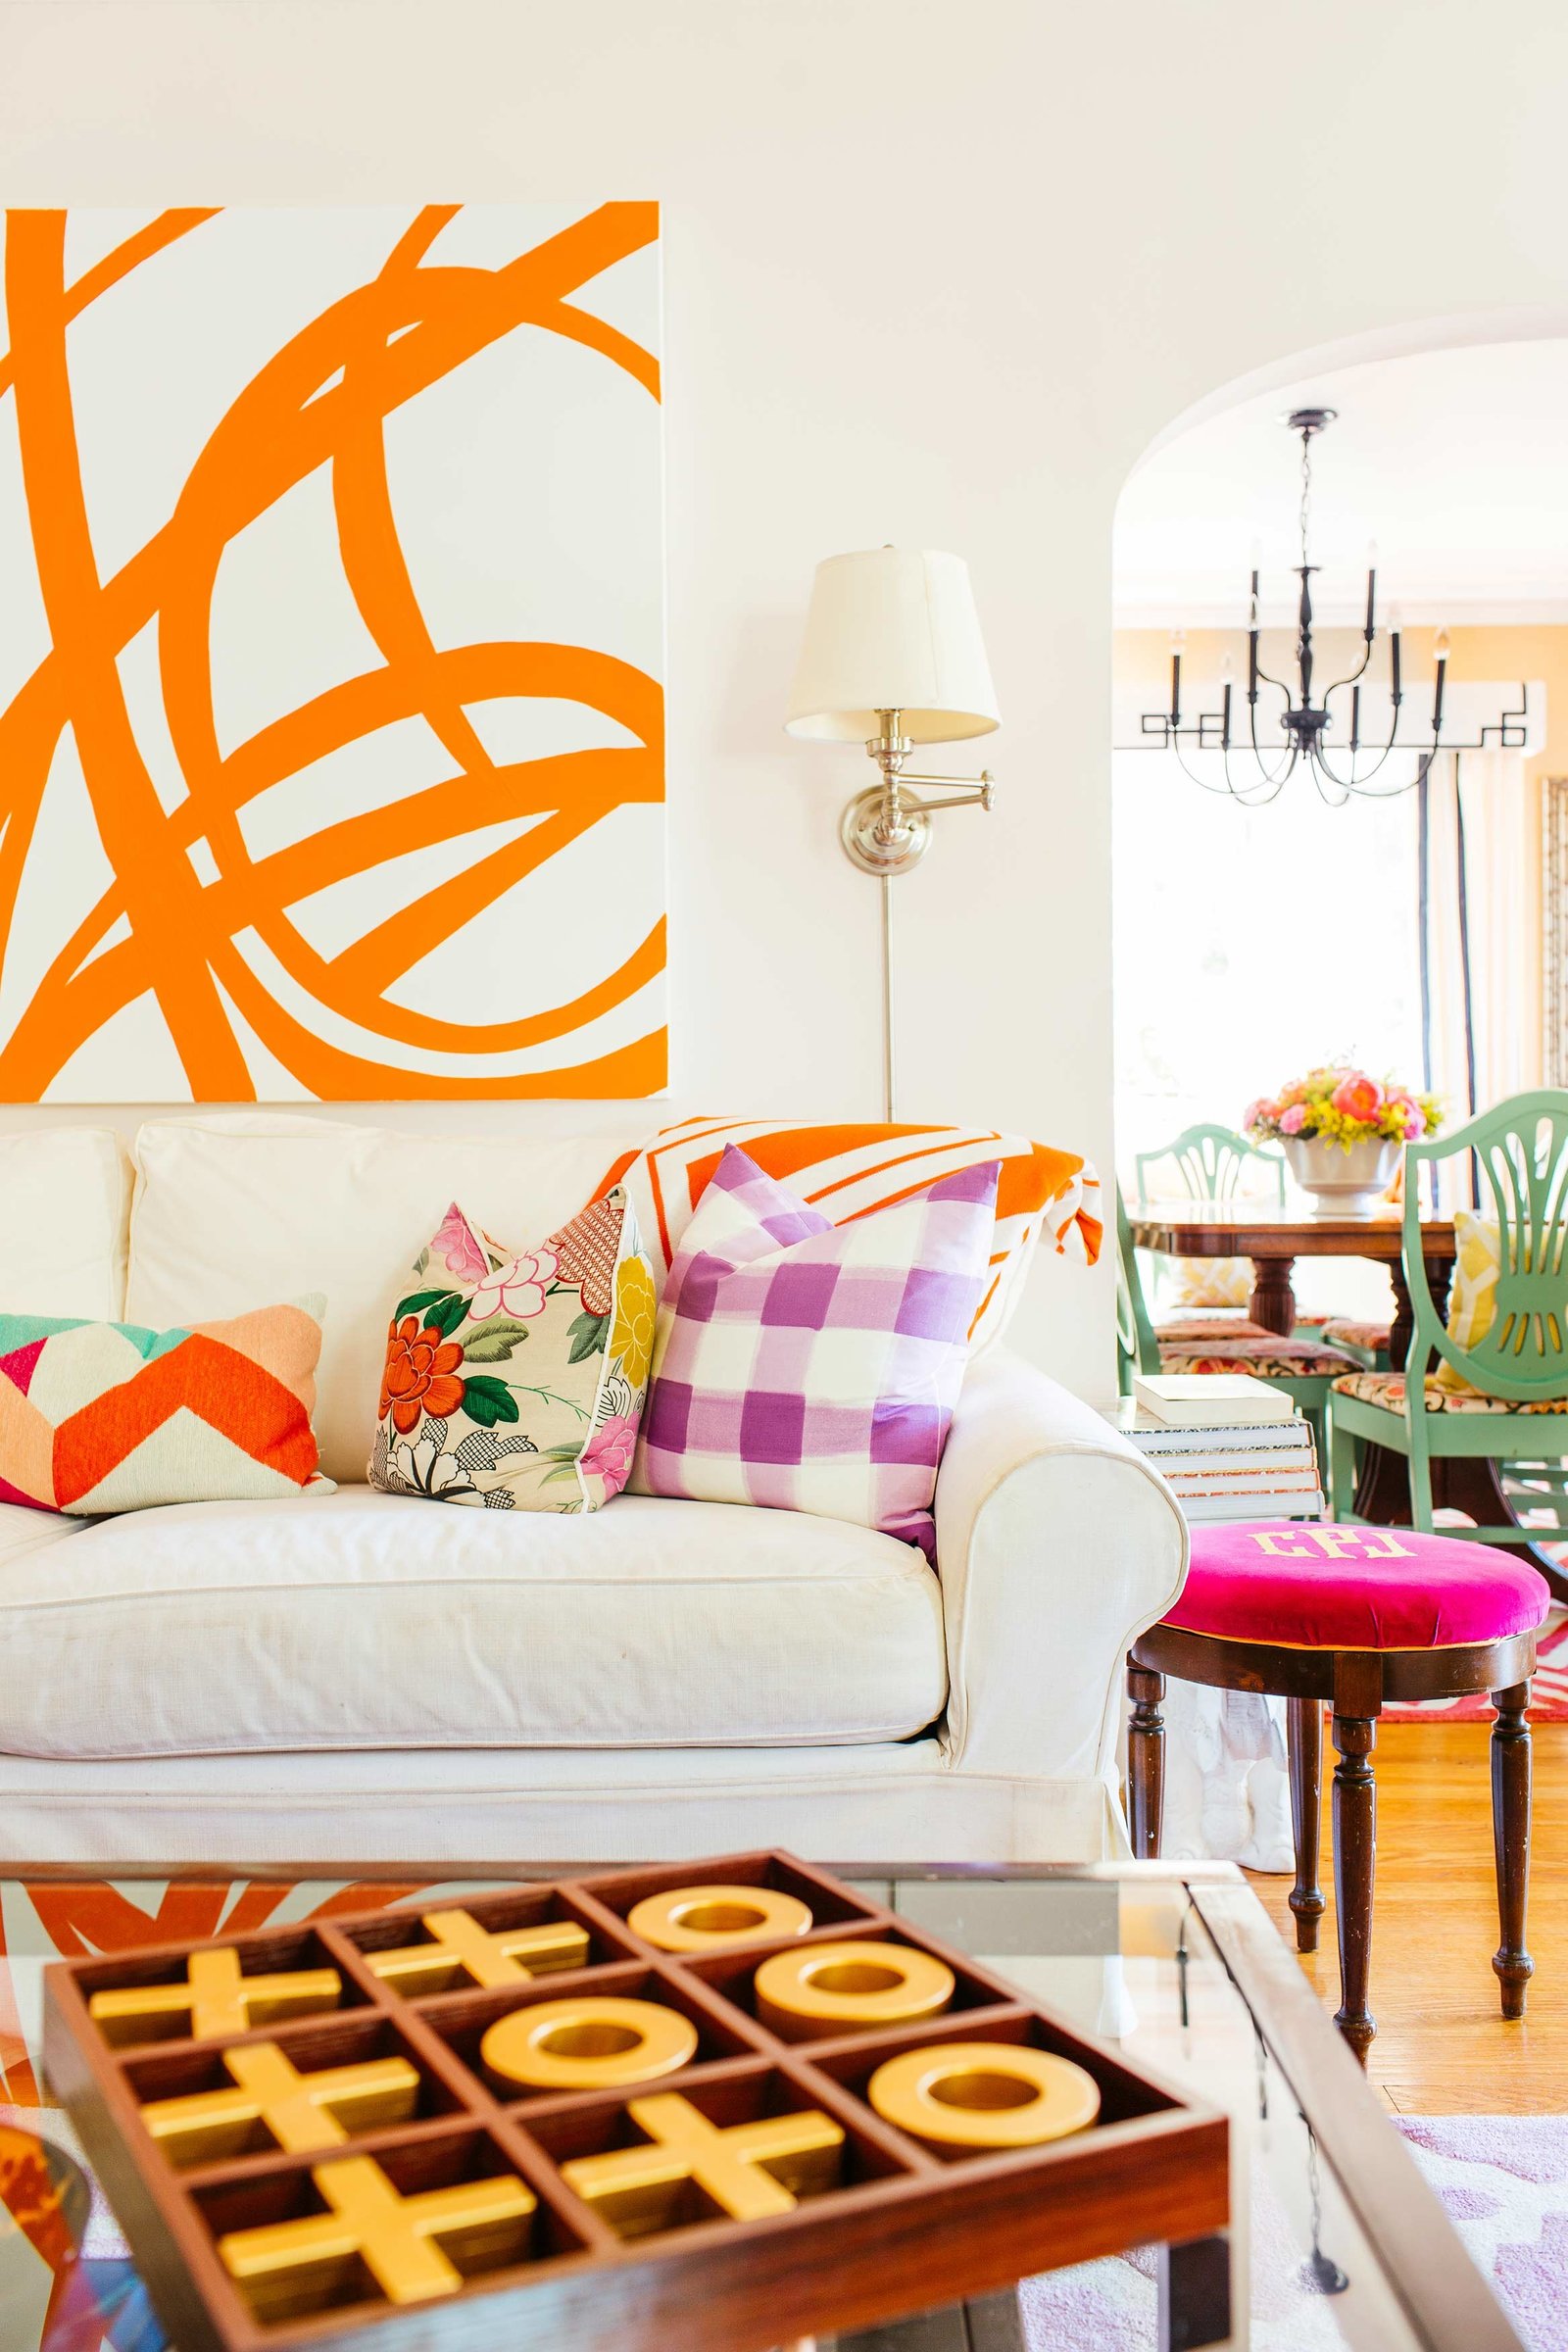 A living room with a large orange and white abstract painting.